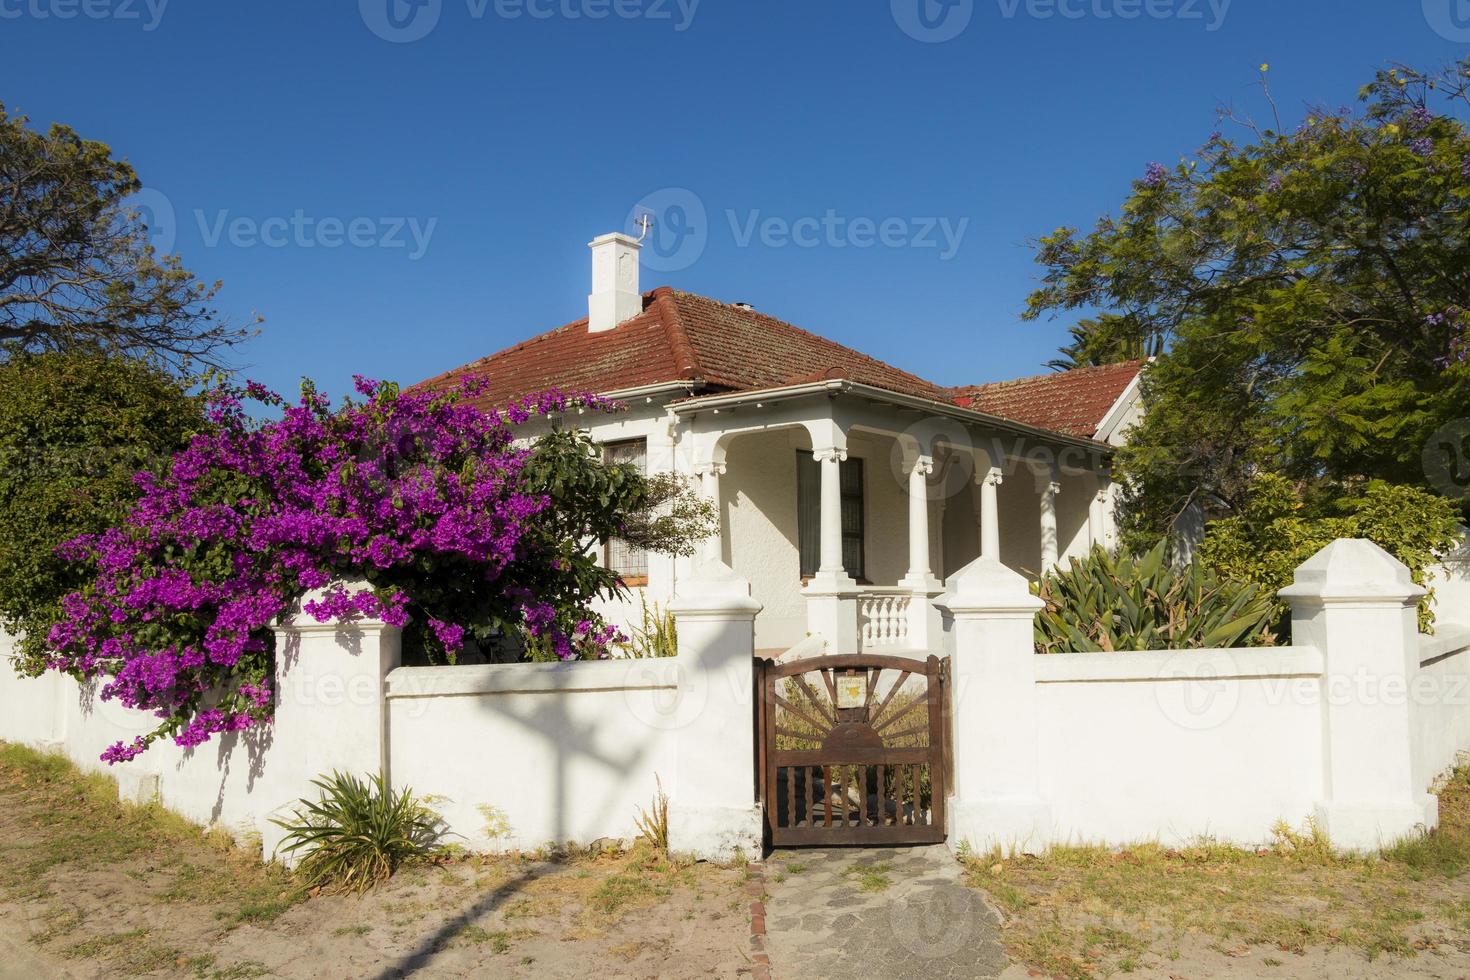 Cottage in the idyllic Claremont in Cape Town, South Africa. photo